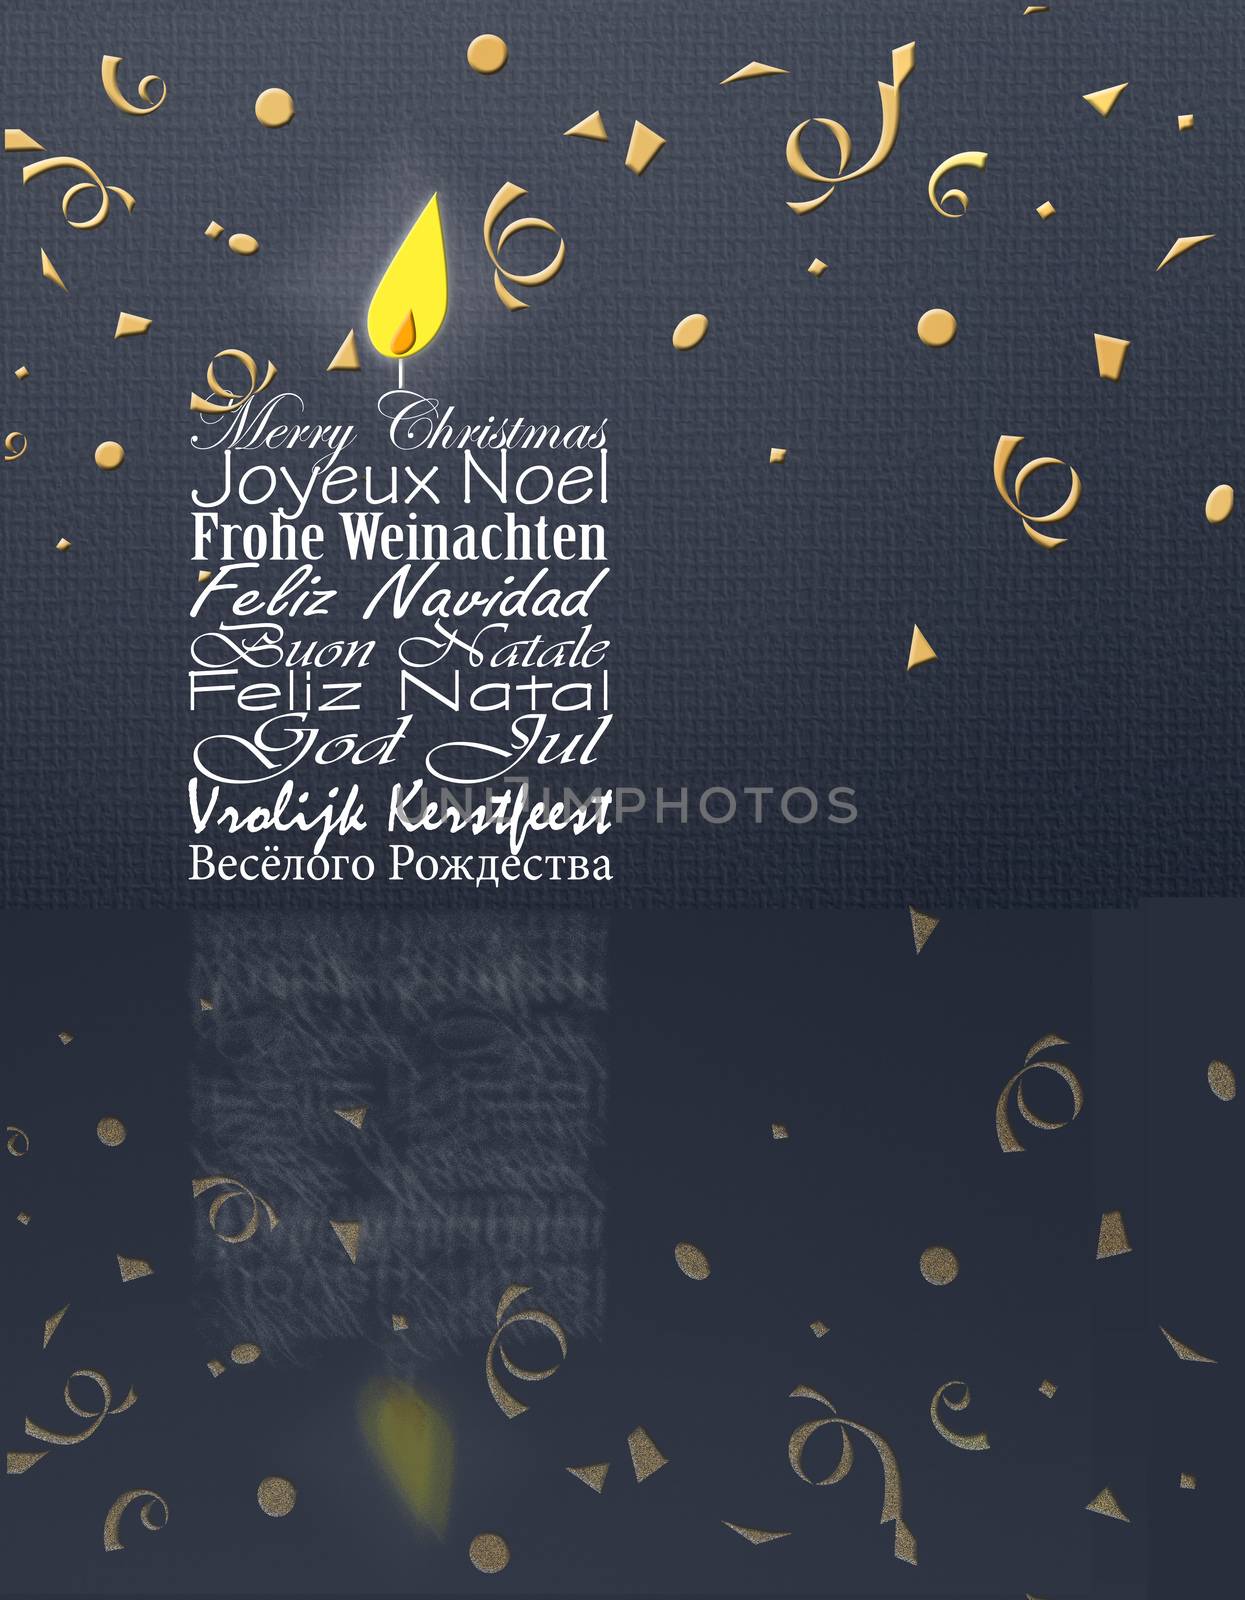 Merry Christmas business card. Christmas wishes in European languages English, French, German, Portuguese, Italian, Spanish, Swedish, Dutch, Russian on blue background with reflection. 3D illustration